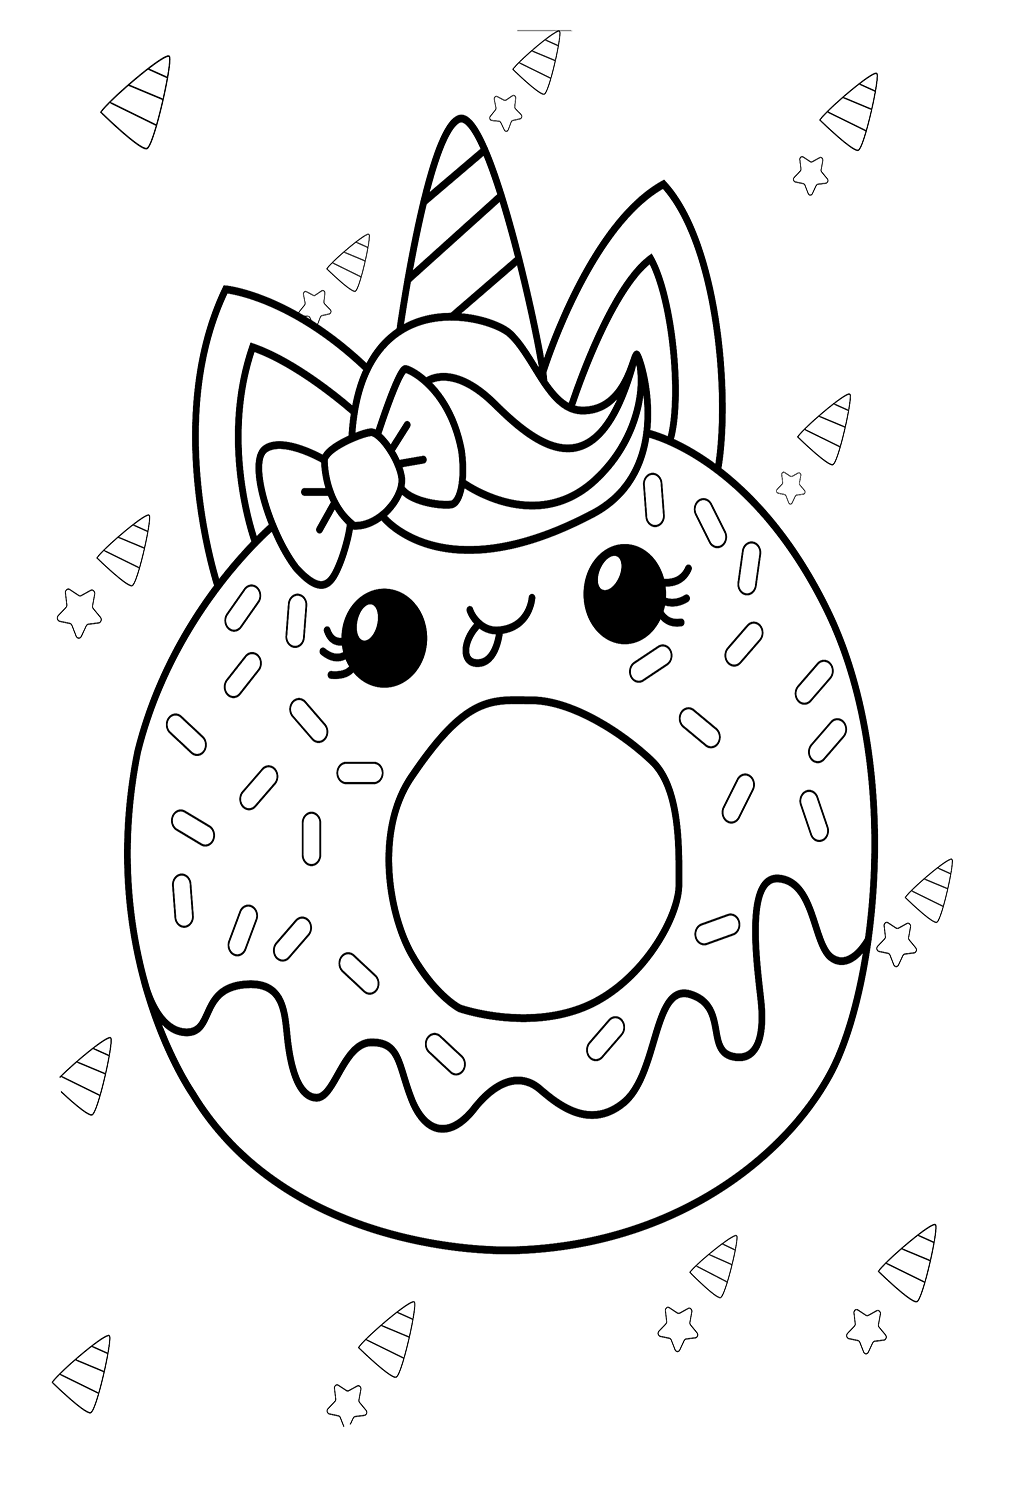 Donut Unicorn Coloring Pages